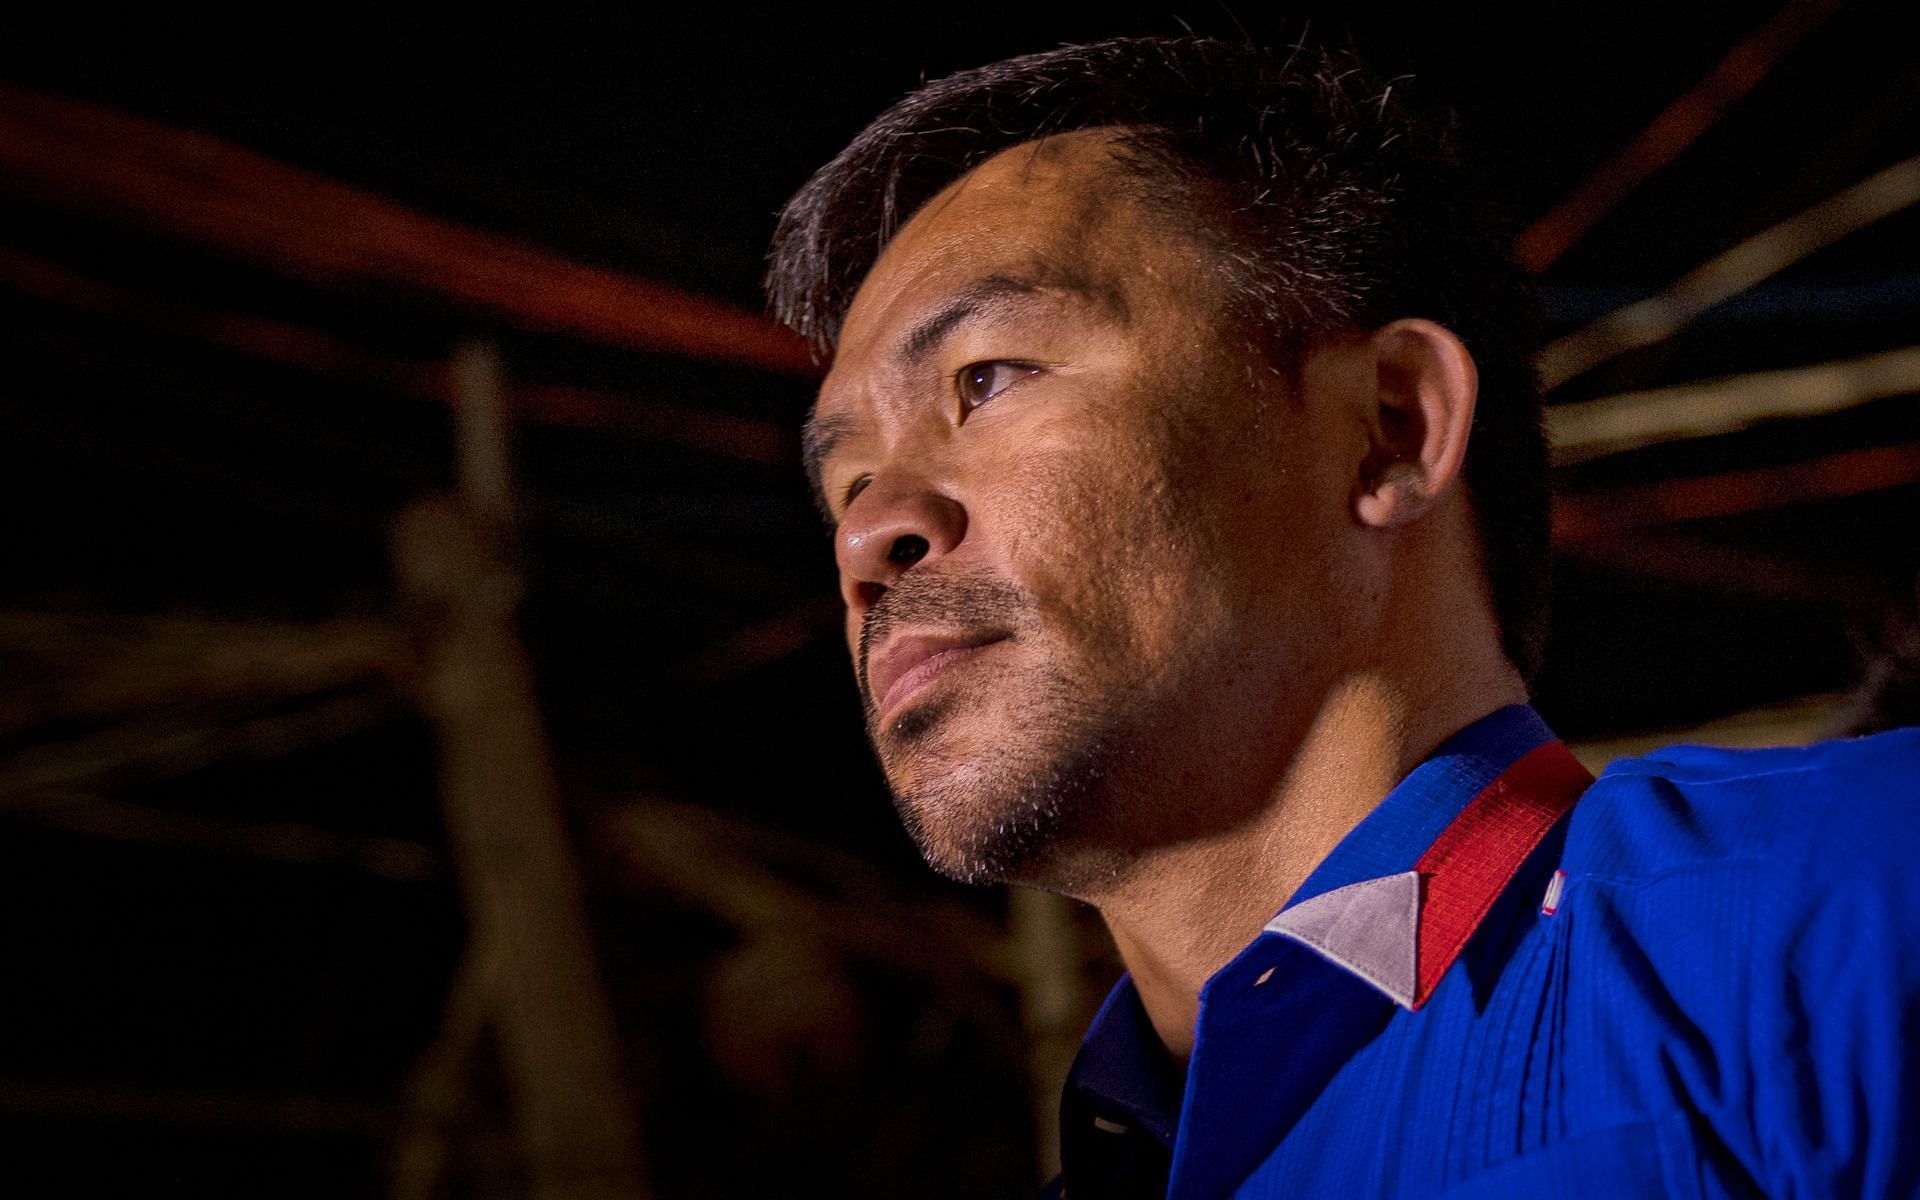 Manny Pacquiao is beheld as one of the best boxers of all time [Image courtesy: Getty Images]